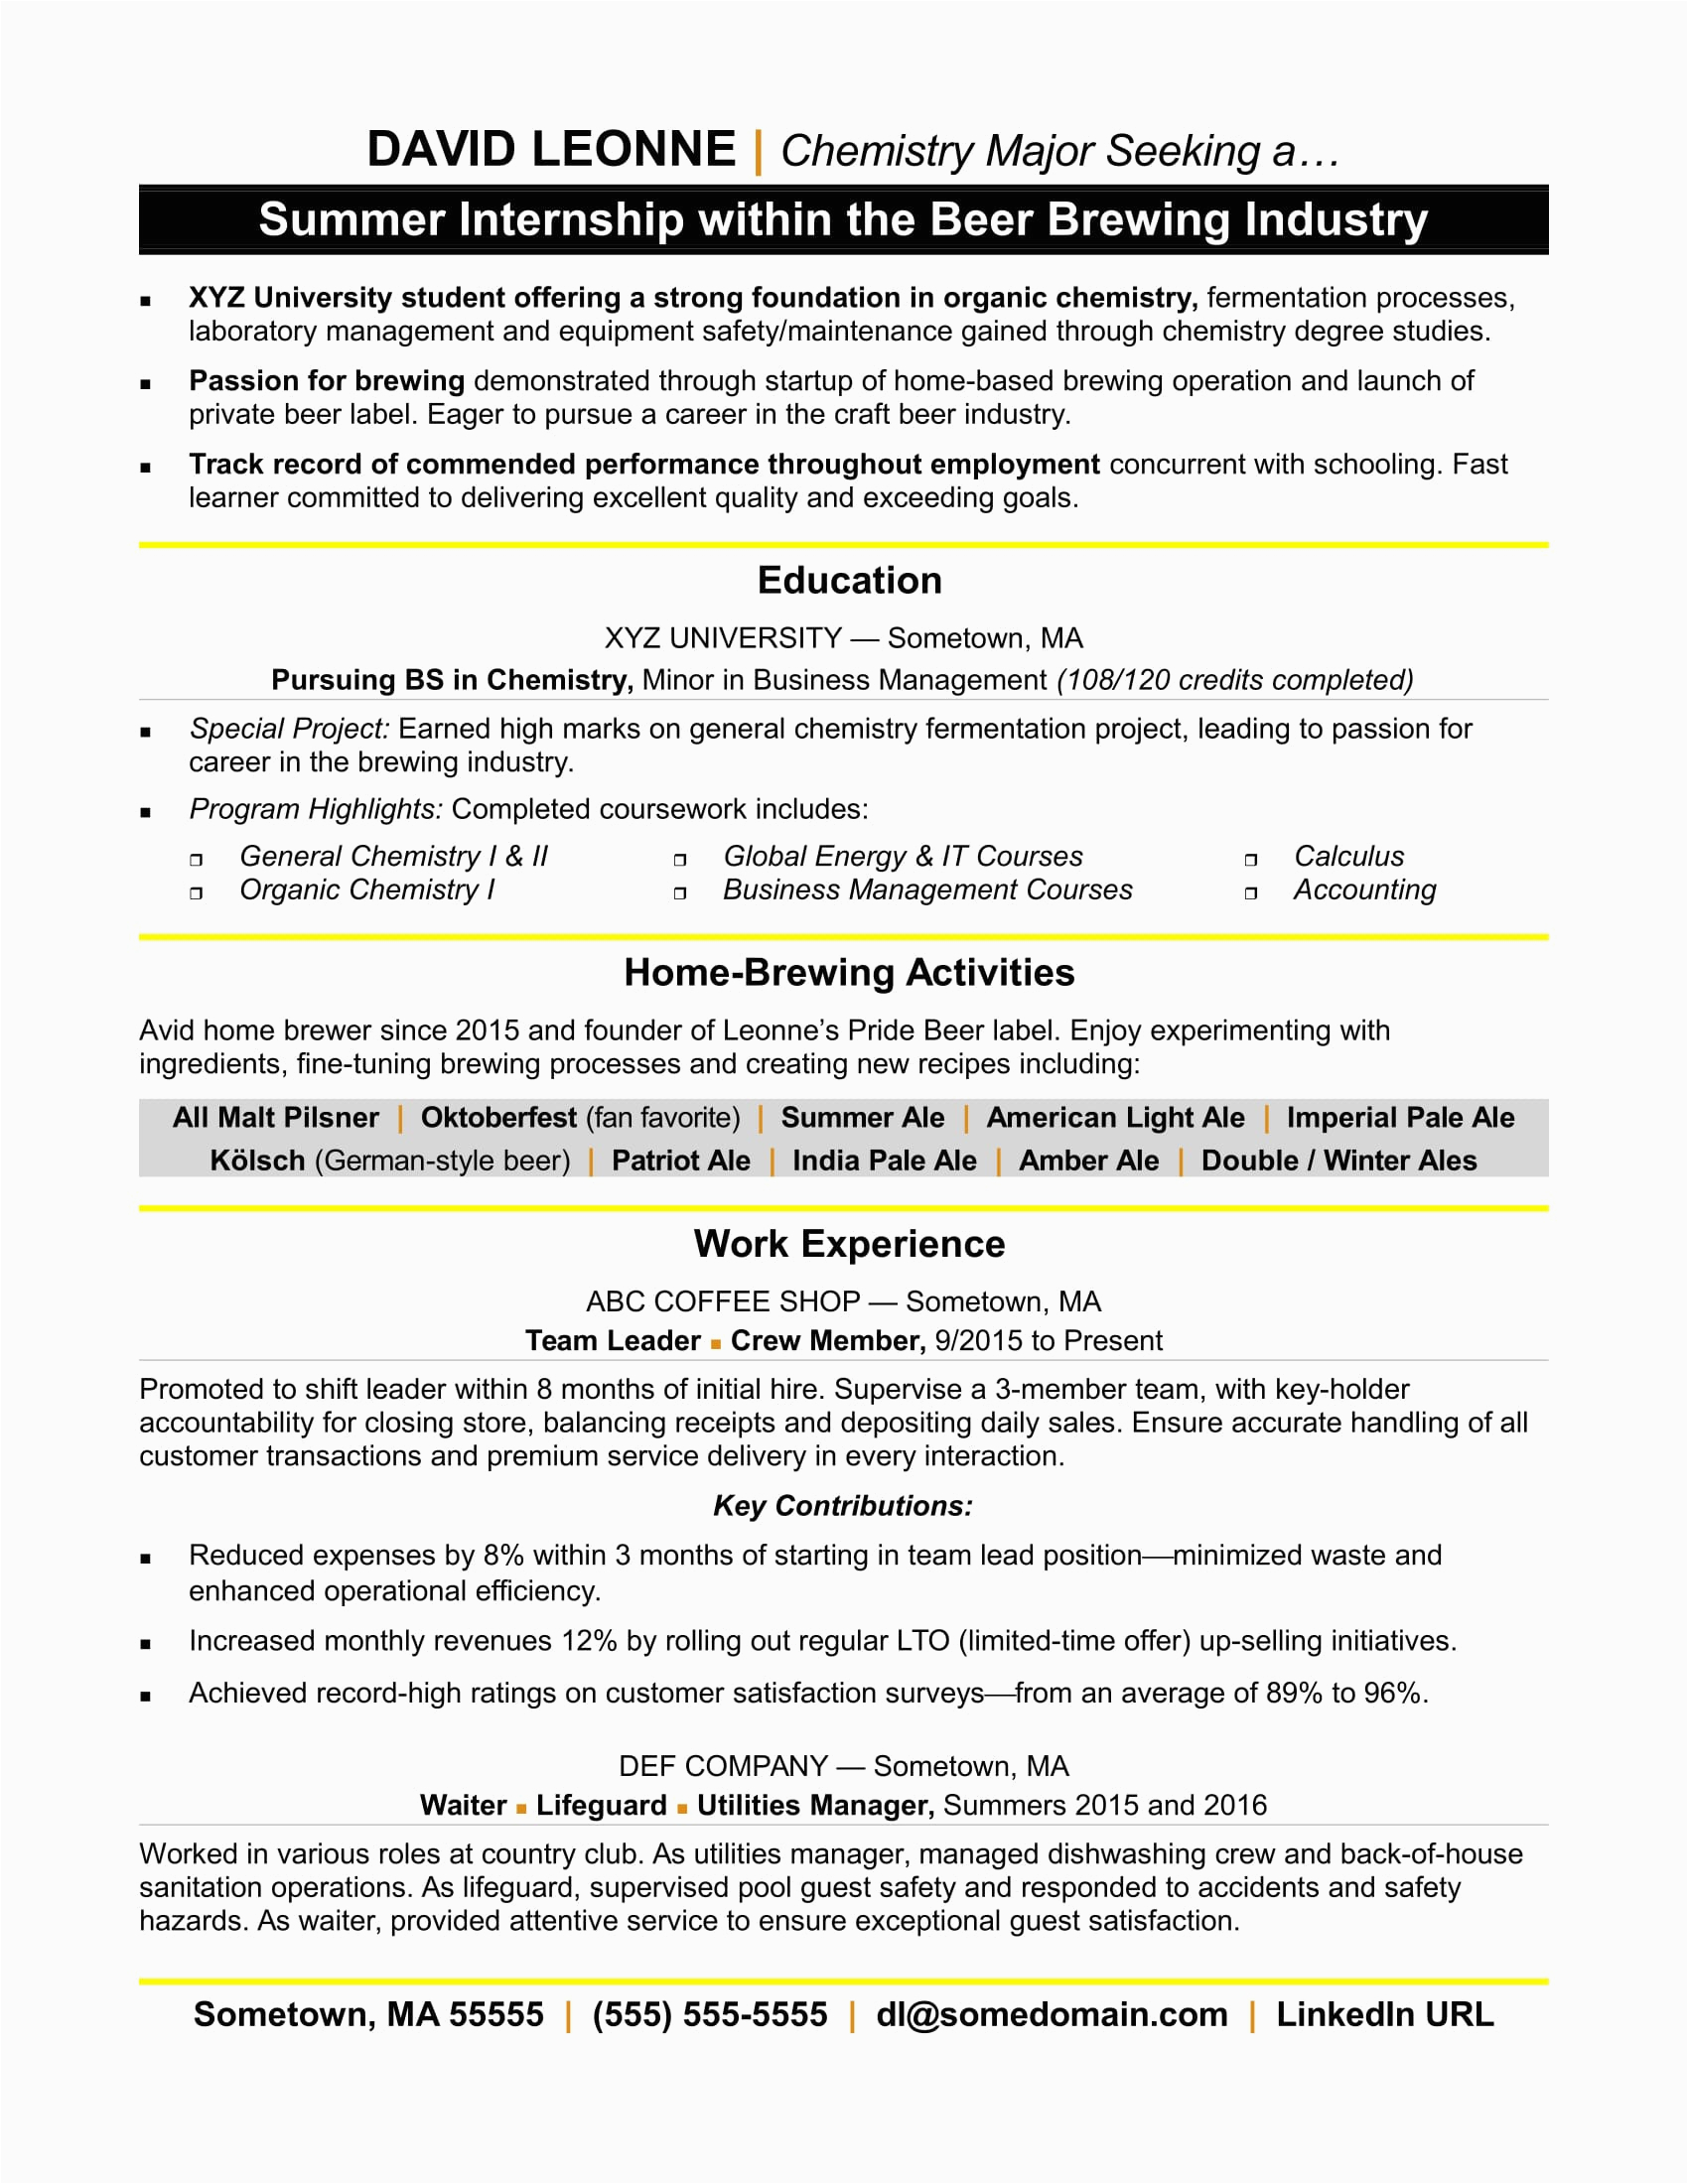 Resume Template for College Student Applying for Internship Resume for Internship